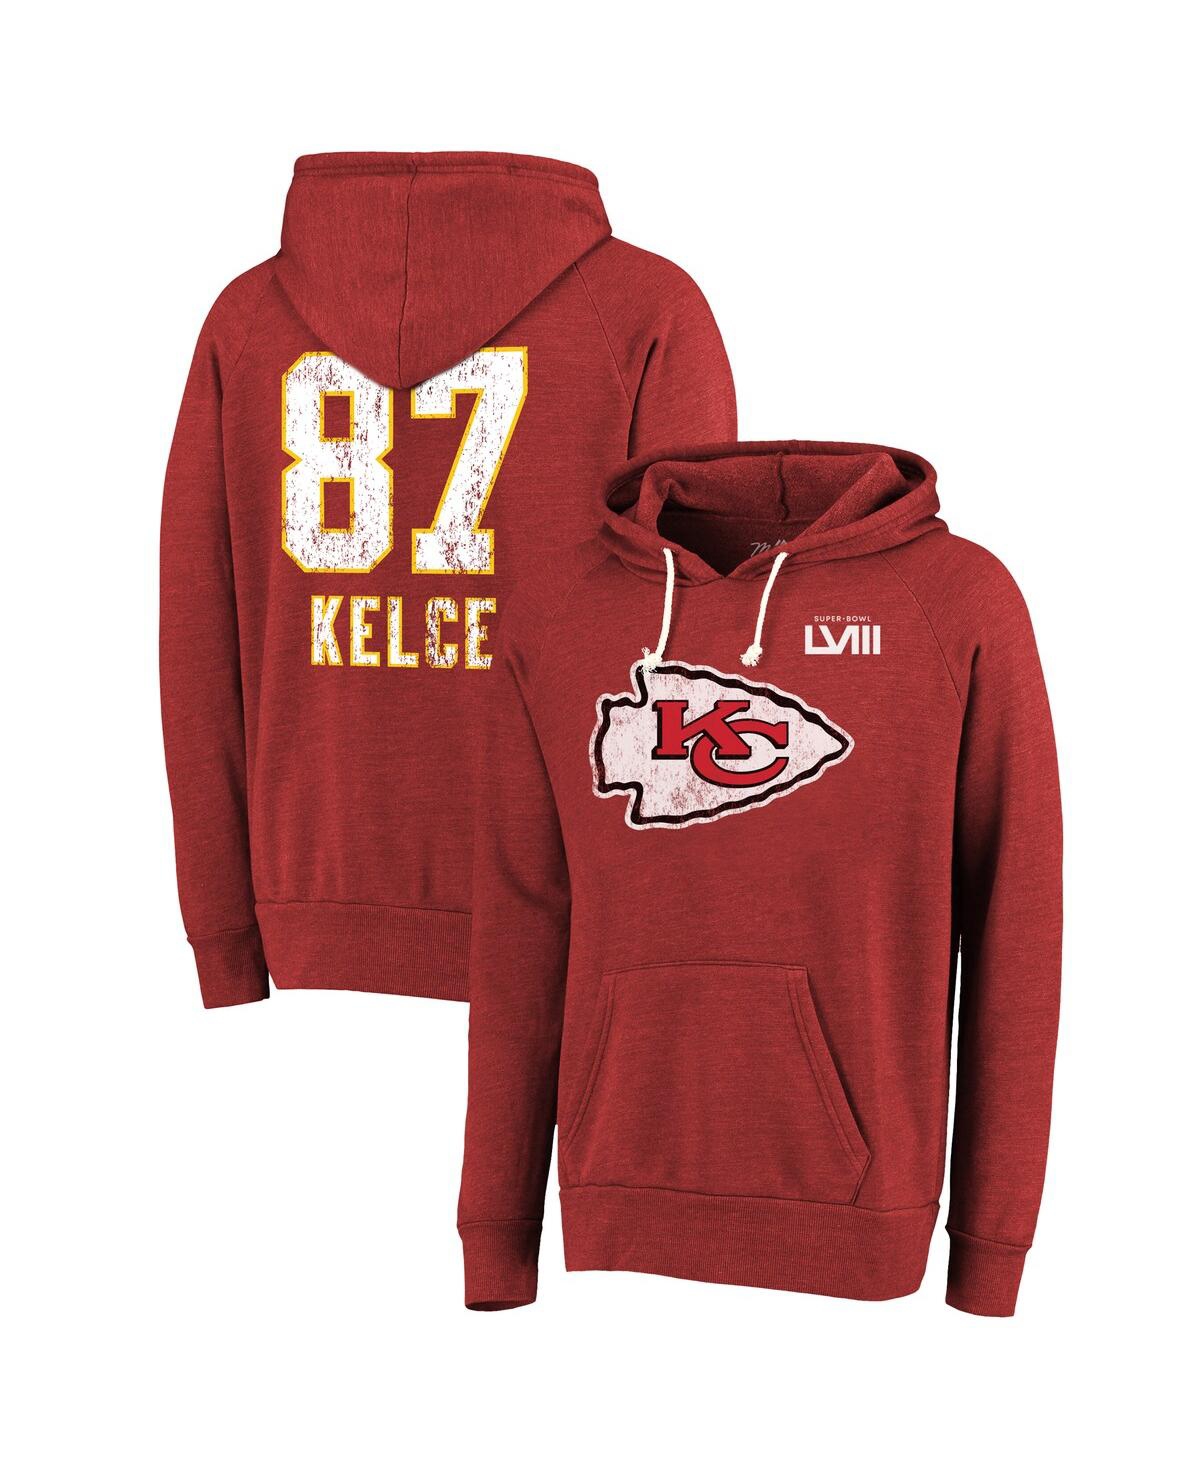 Men's Majestic Threads Travis Kelce Red Distressed Kansas City Chiefs Super Bowl Lviii Player Name and Number Tri-Blend Pullover Hoodie - Red